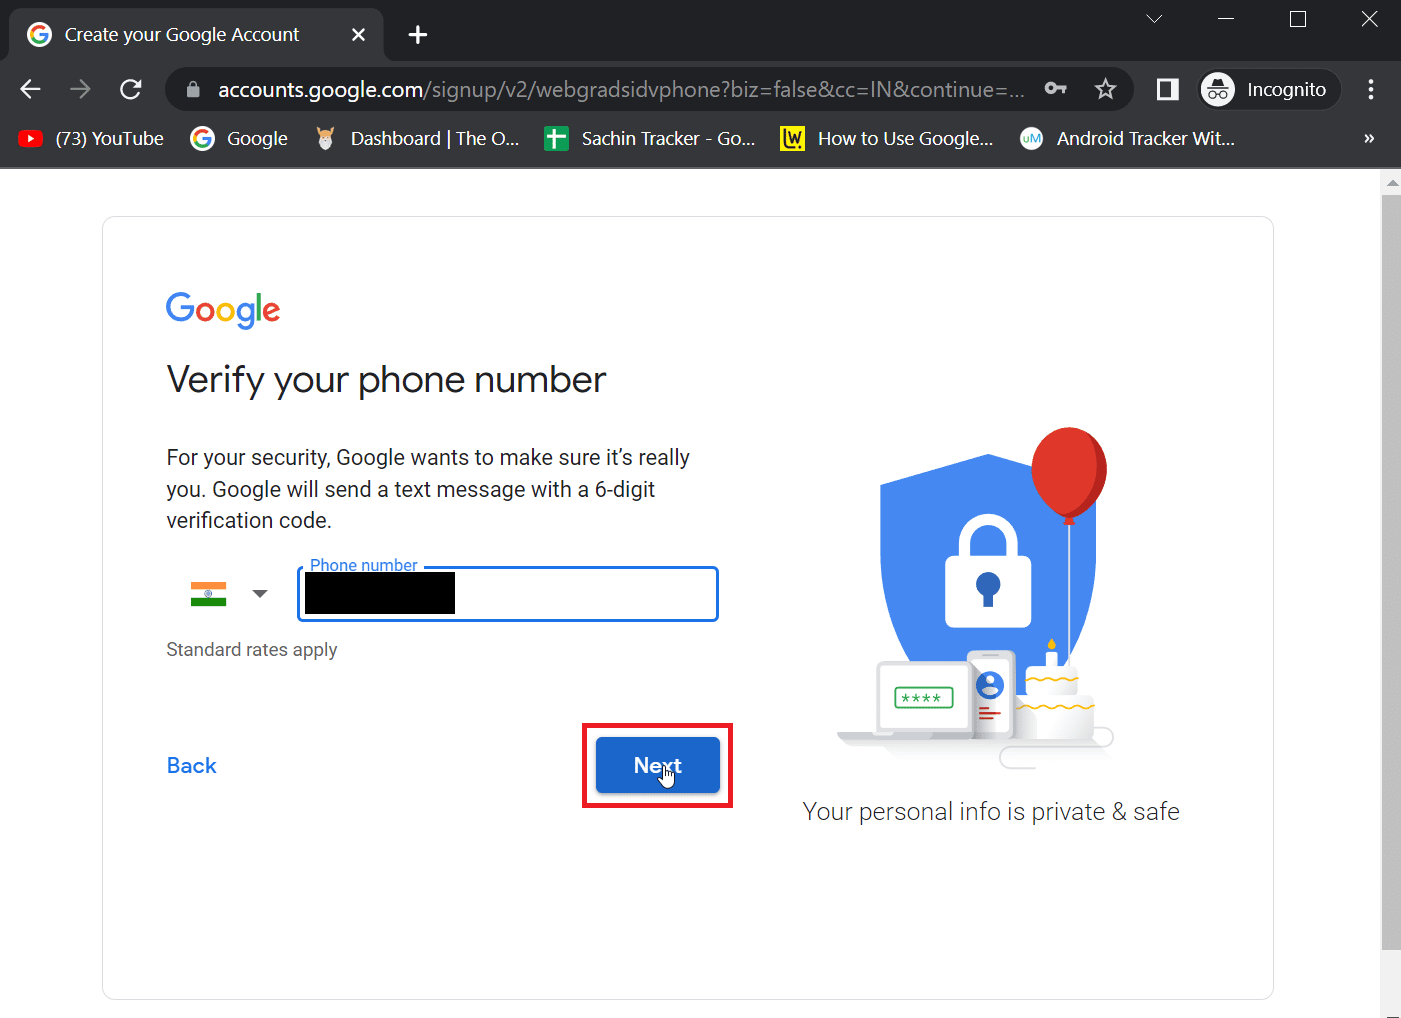 Enter a phone number to let Google verify your identity and click on Next